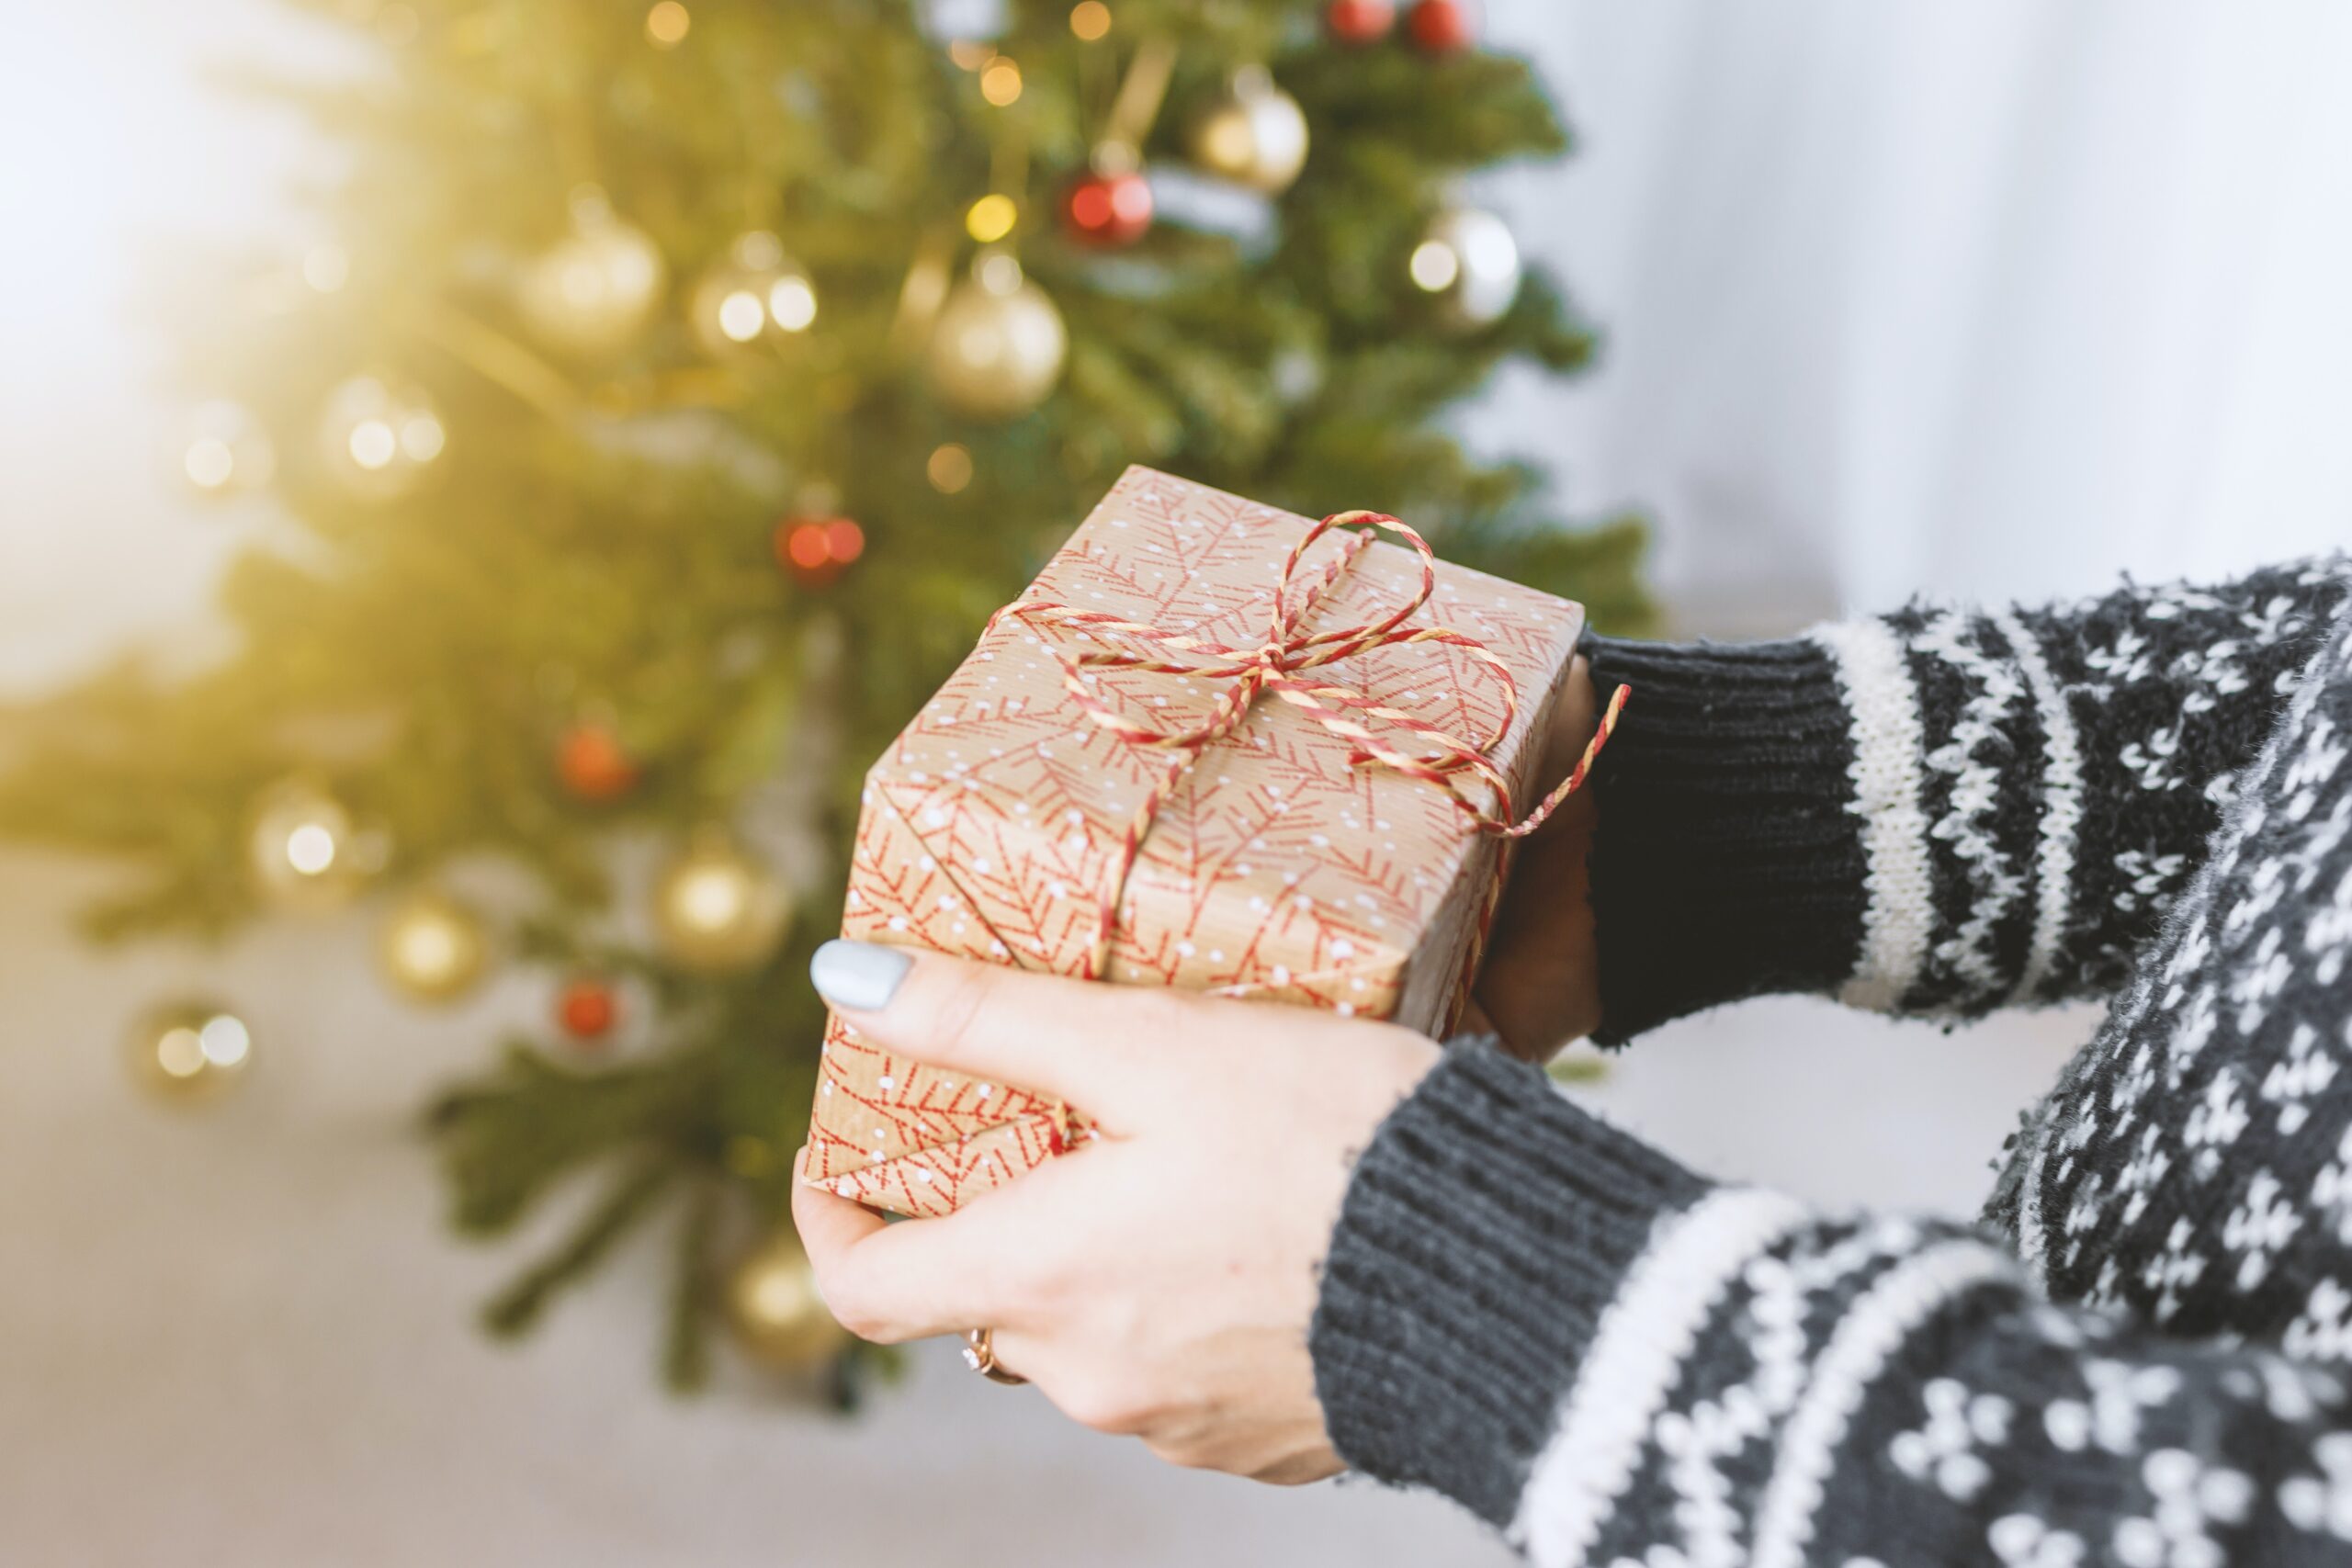 2019 Winter Holiday Shopping Trends And Popular Gifts